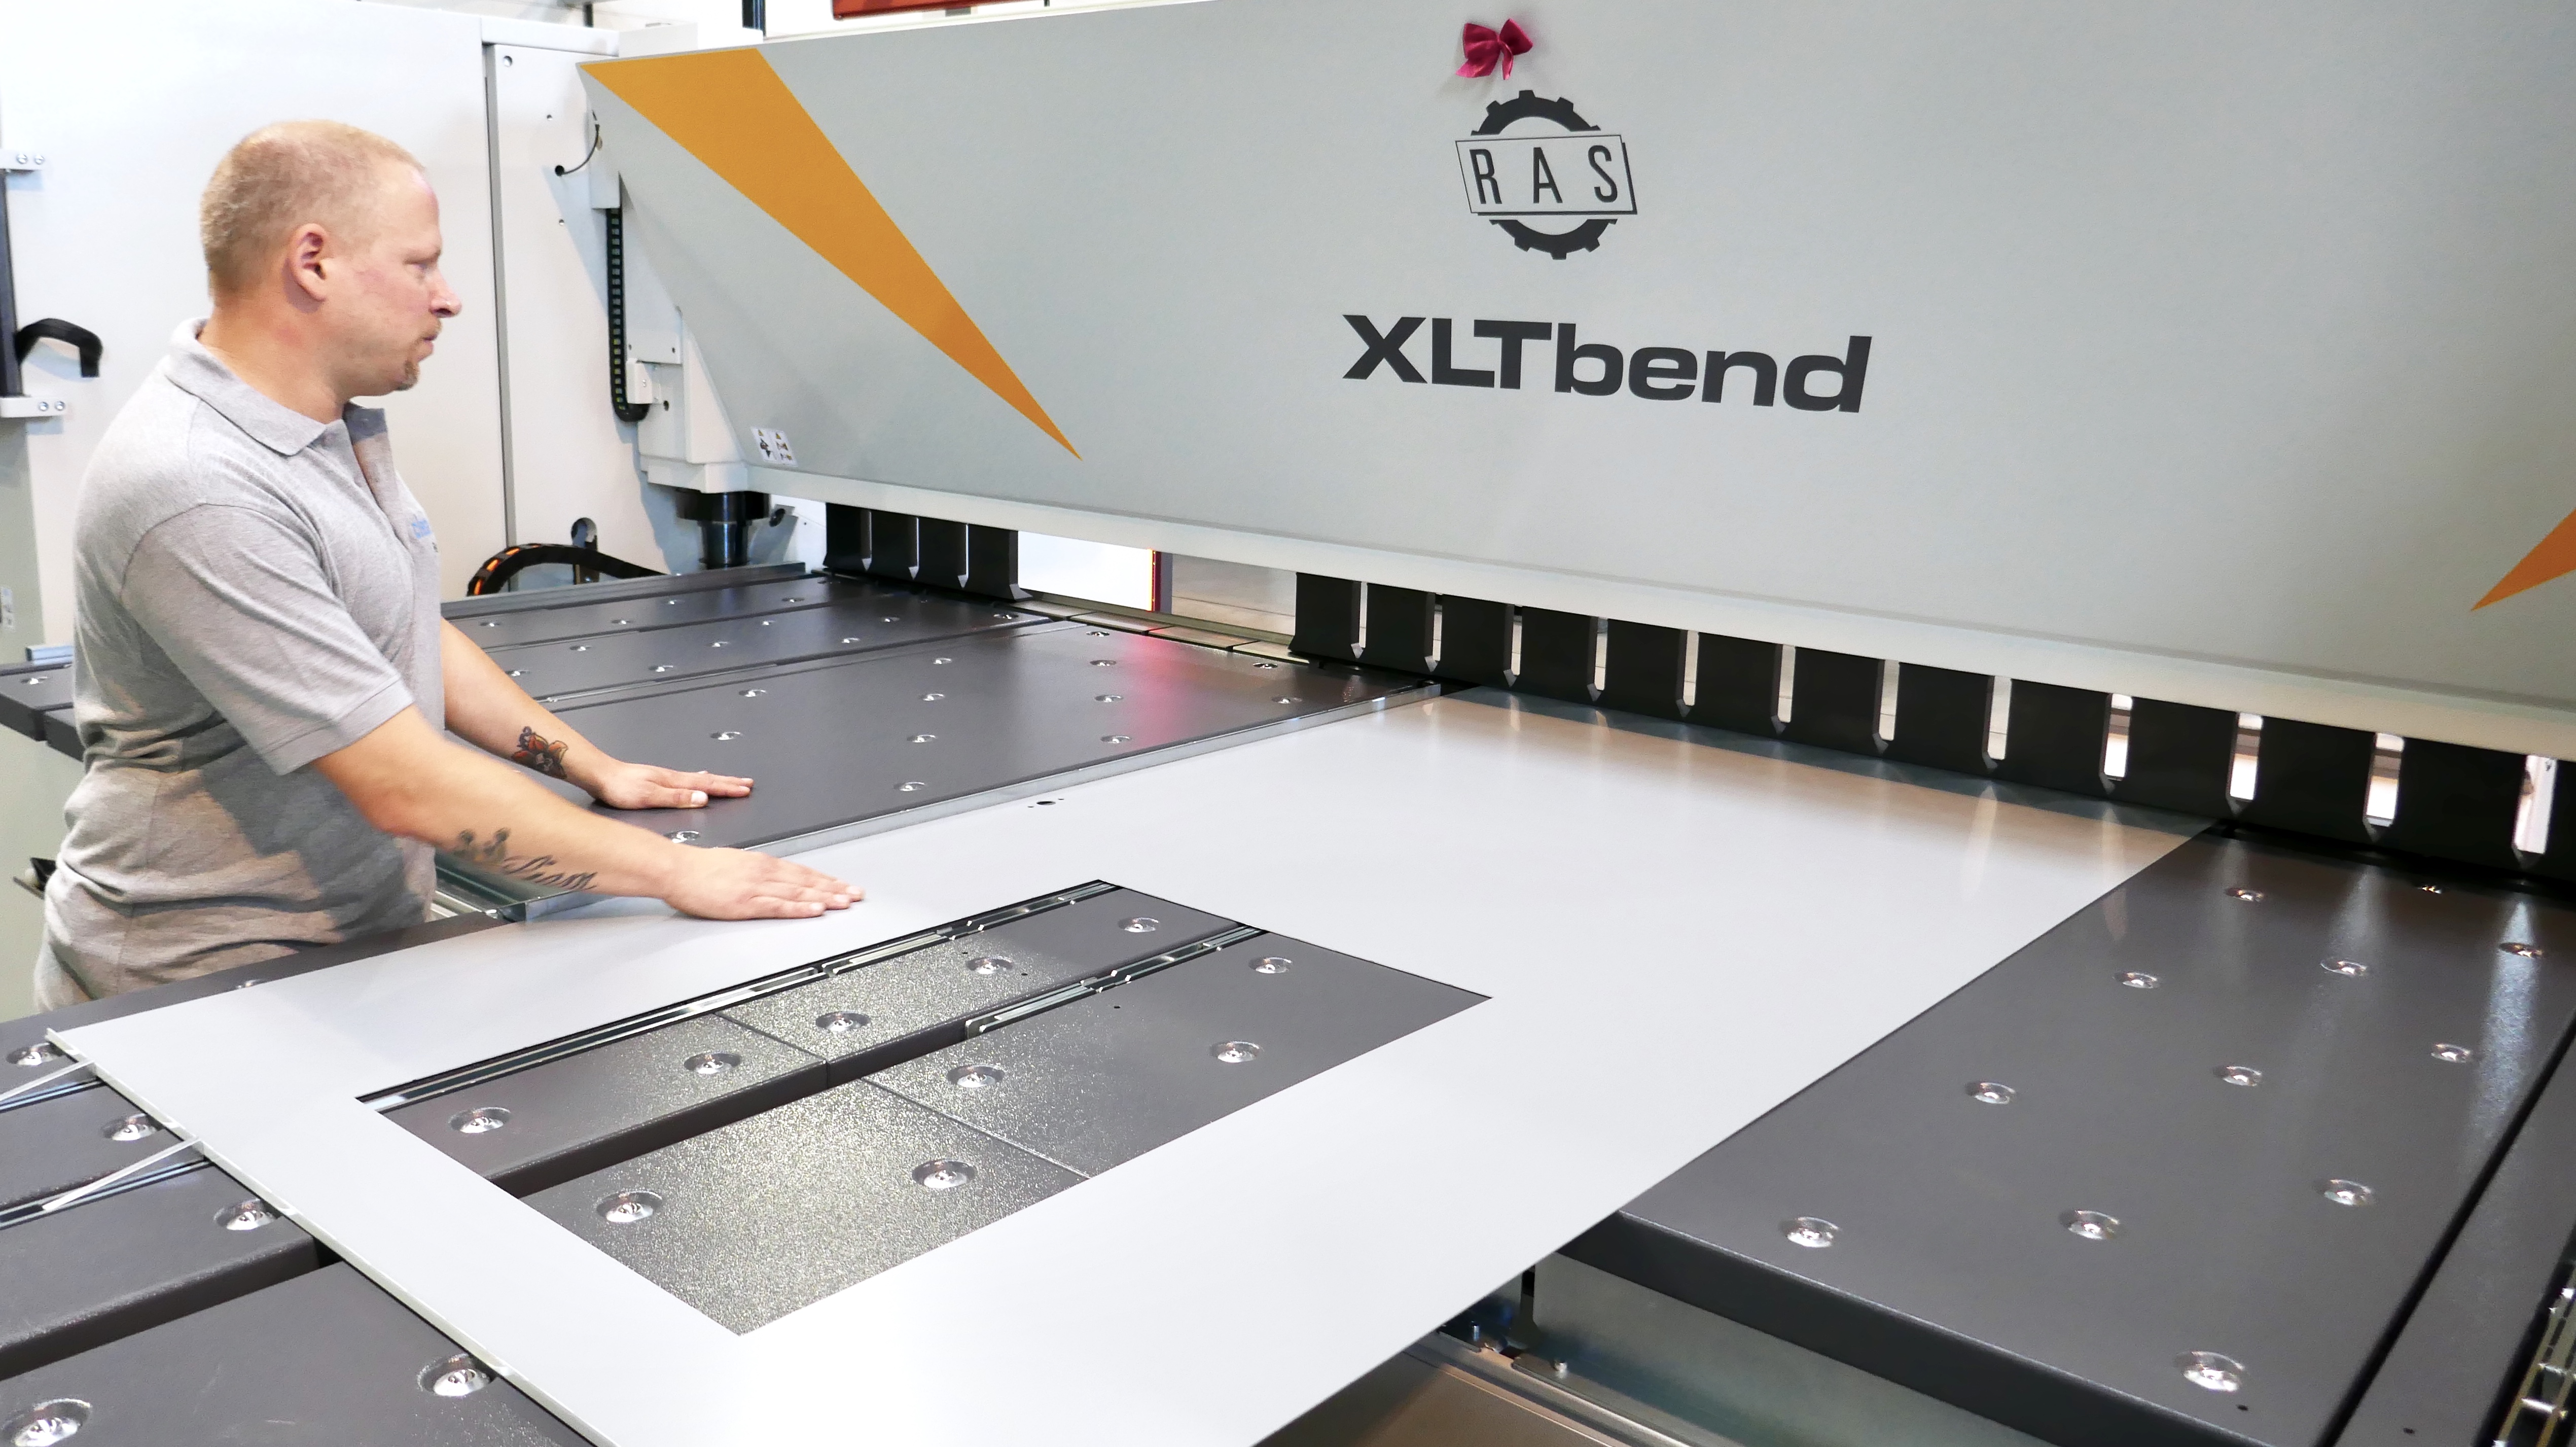 The UpDown folding technology is ideal for bending large size and kink-sensitive wall and ceiling clean room panels. A laser line of the Virtual Navigator (ViN) shows the operator the loading position of the part in each program step.